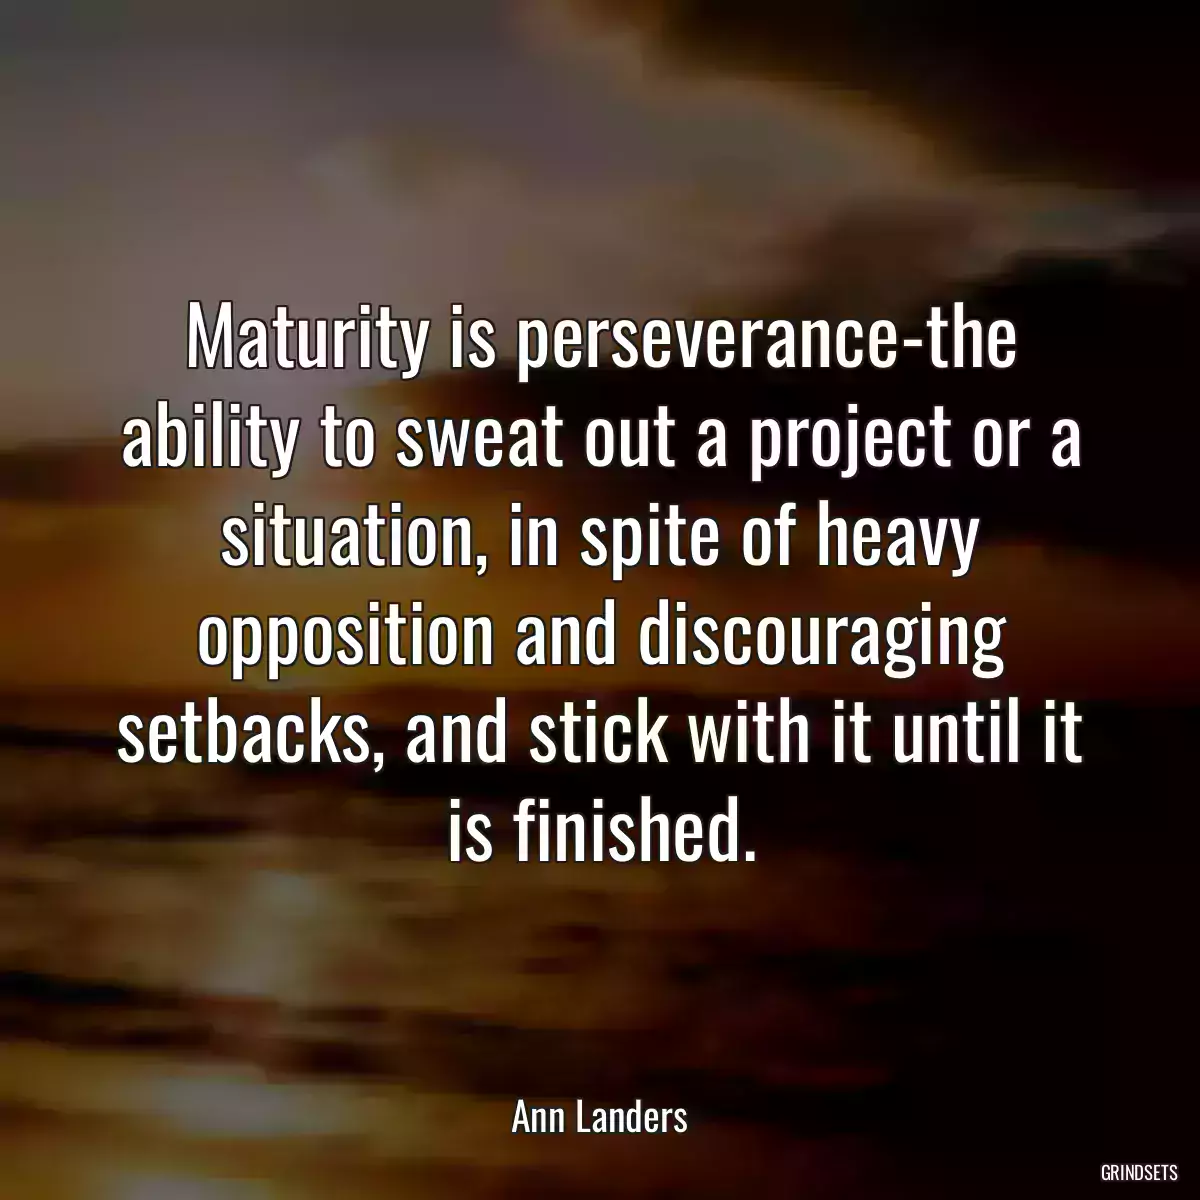 Maturity is perseverance-the ability to sweat out a project or a situation, in spite of heavy opposition and discouraging setbacks, and stick with it until it is finished.